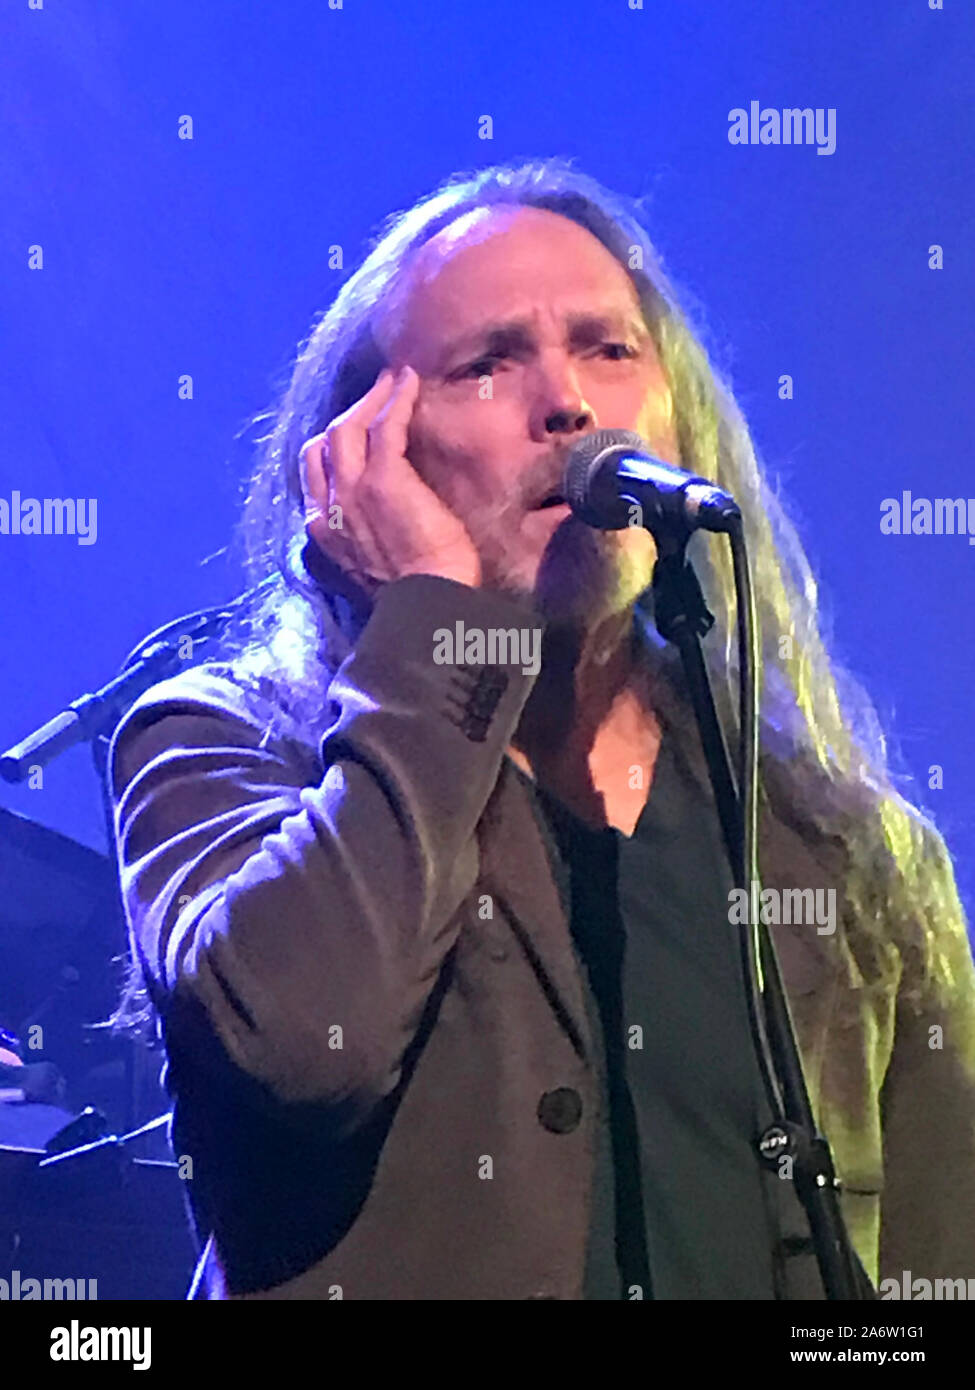 Timothy B. Schmidt of Eagles performing at the Troubadour in Los Angeles circa 2019 Stock Photo